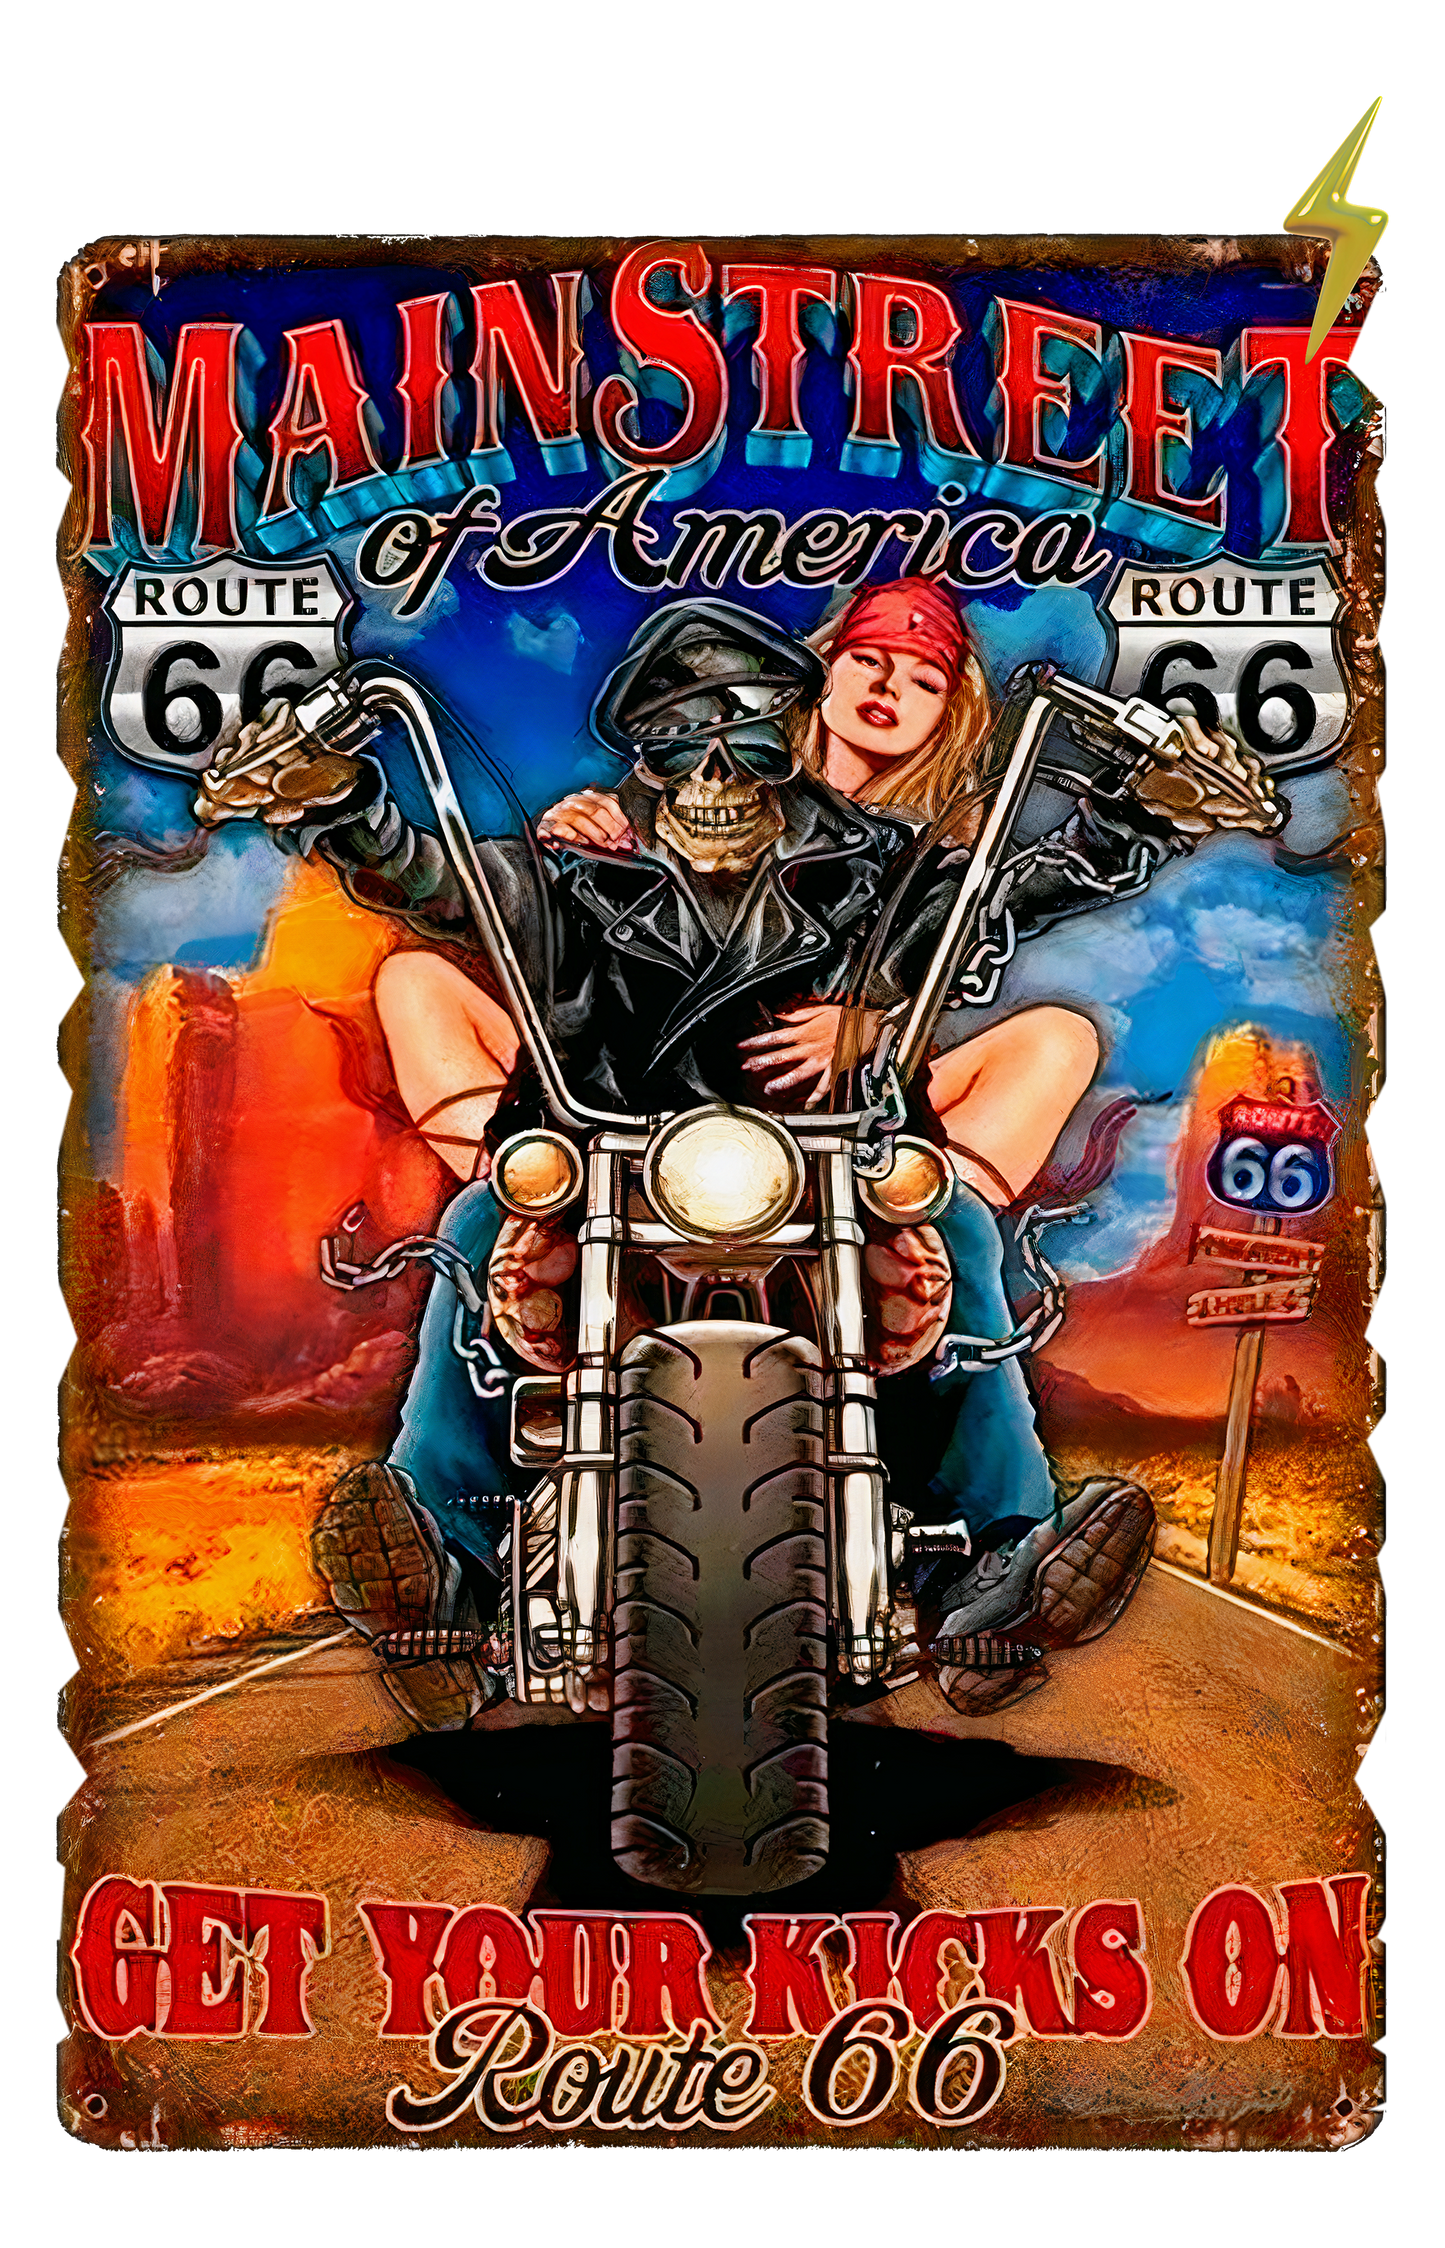 HARLEY ROUTE 66